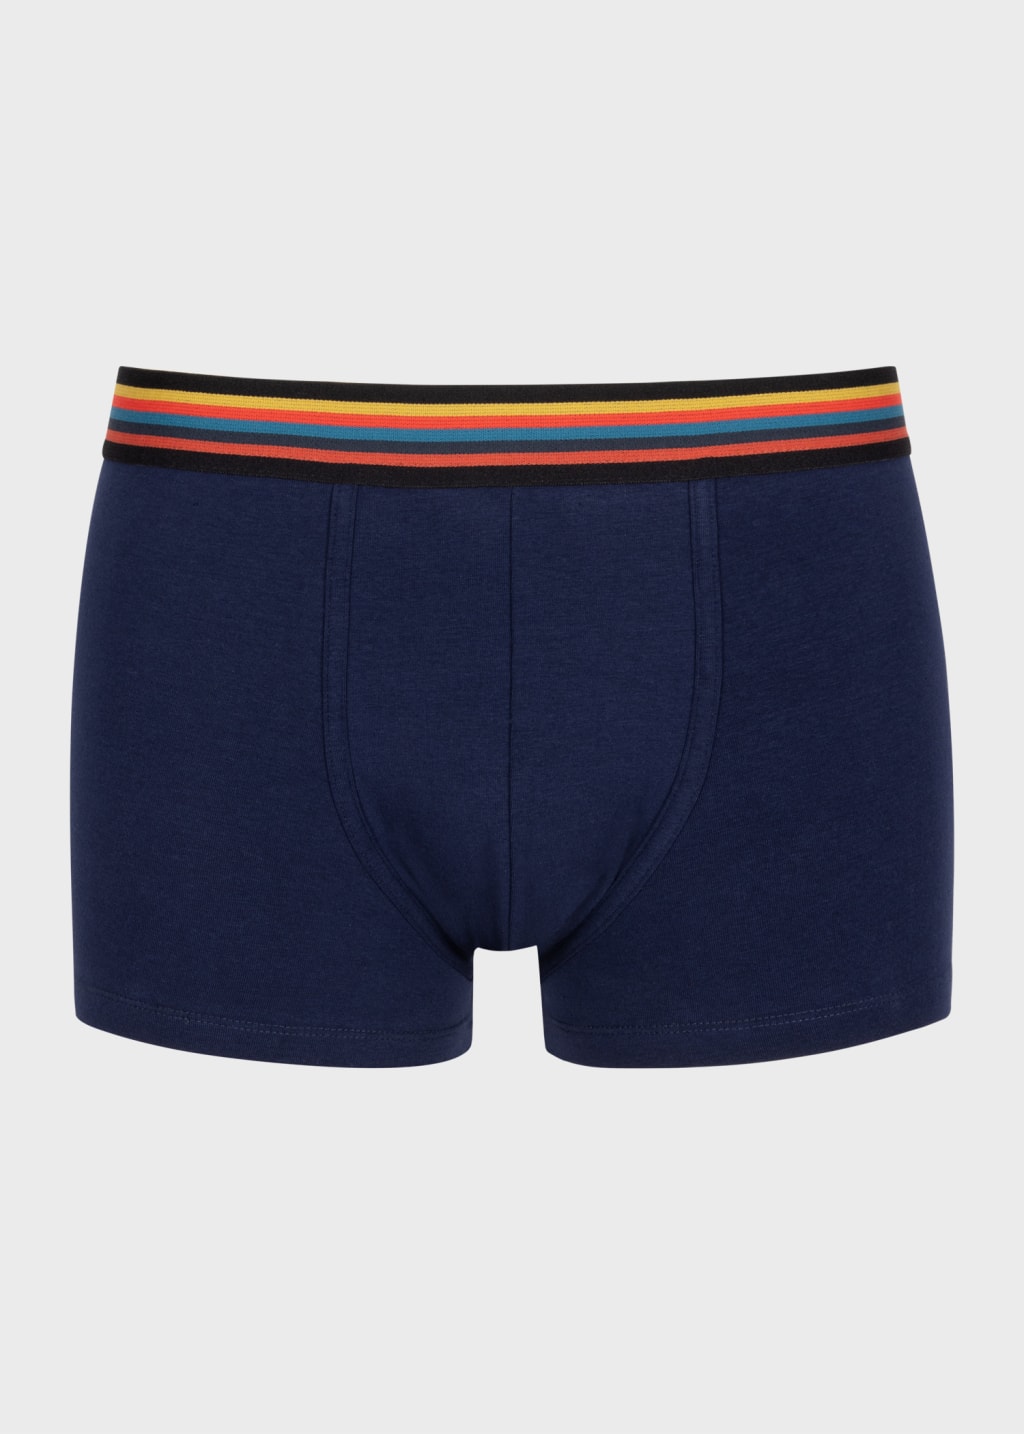 Front View - Navy Low-Rise 'Artist Stripe' Boxer Briefs Three Pack Paul Smith 